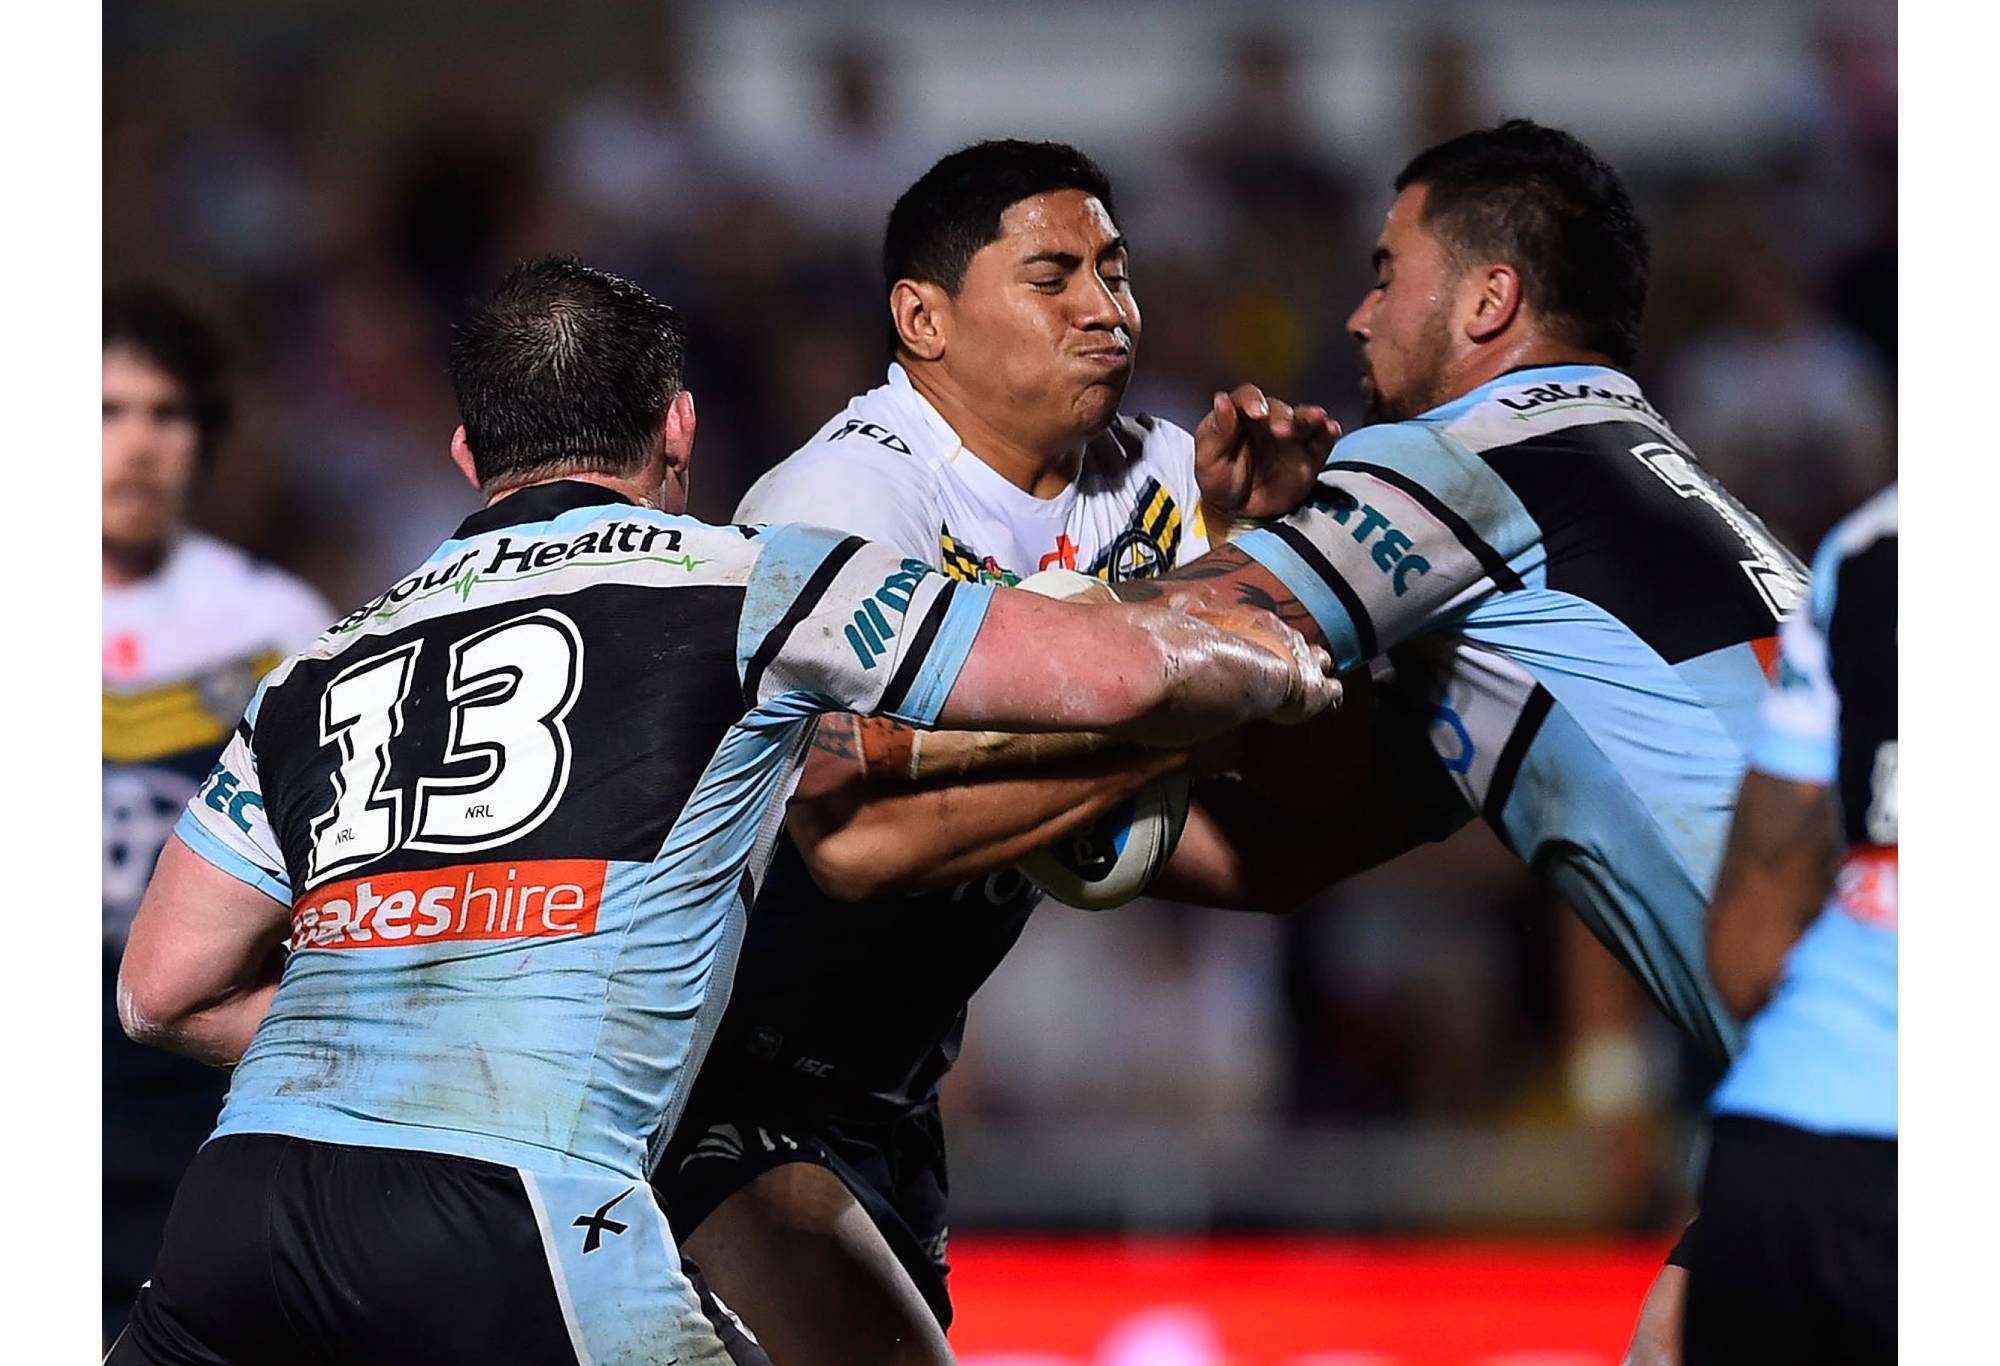 TOWNSVILLE, AUSTRALIA - SEPTEMBER 19: Jason Taumalolo of the Cowboys is tackled by Paul Gallen of the Sharks during the Second NRL Semi Final match between the North Queensland Cowboys and the Cronulla Sharks at 1300SMILES Stadium on September 19, 2015 in Townsville, Australia. (Photo by Ian Hitchcock/Getty Images)